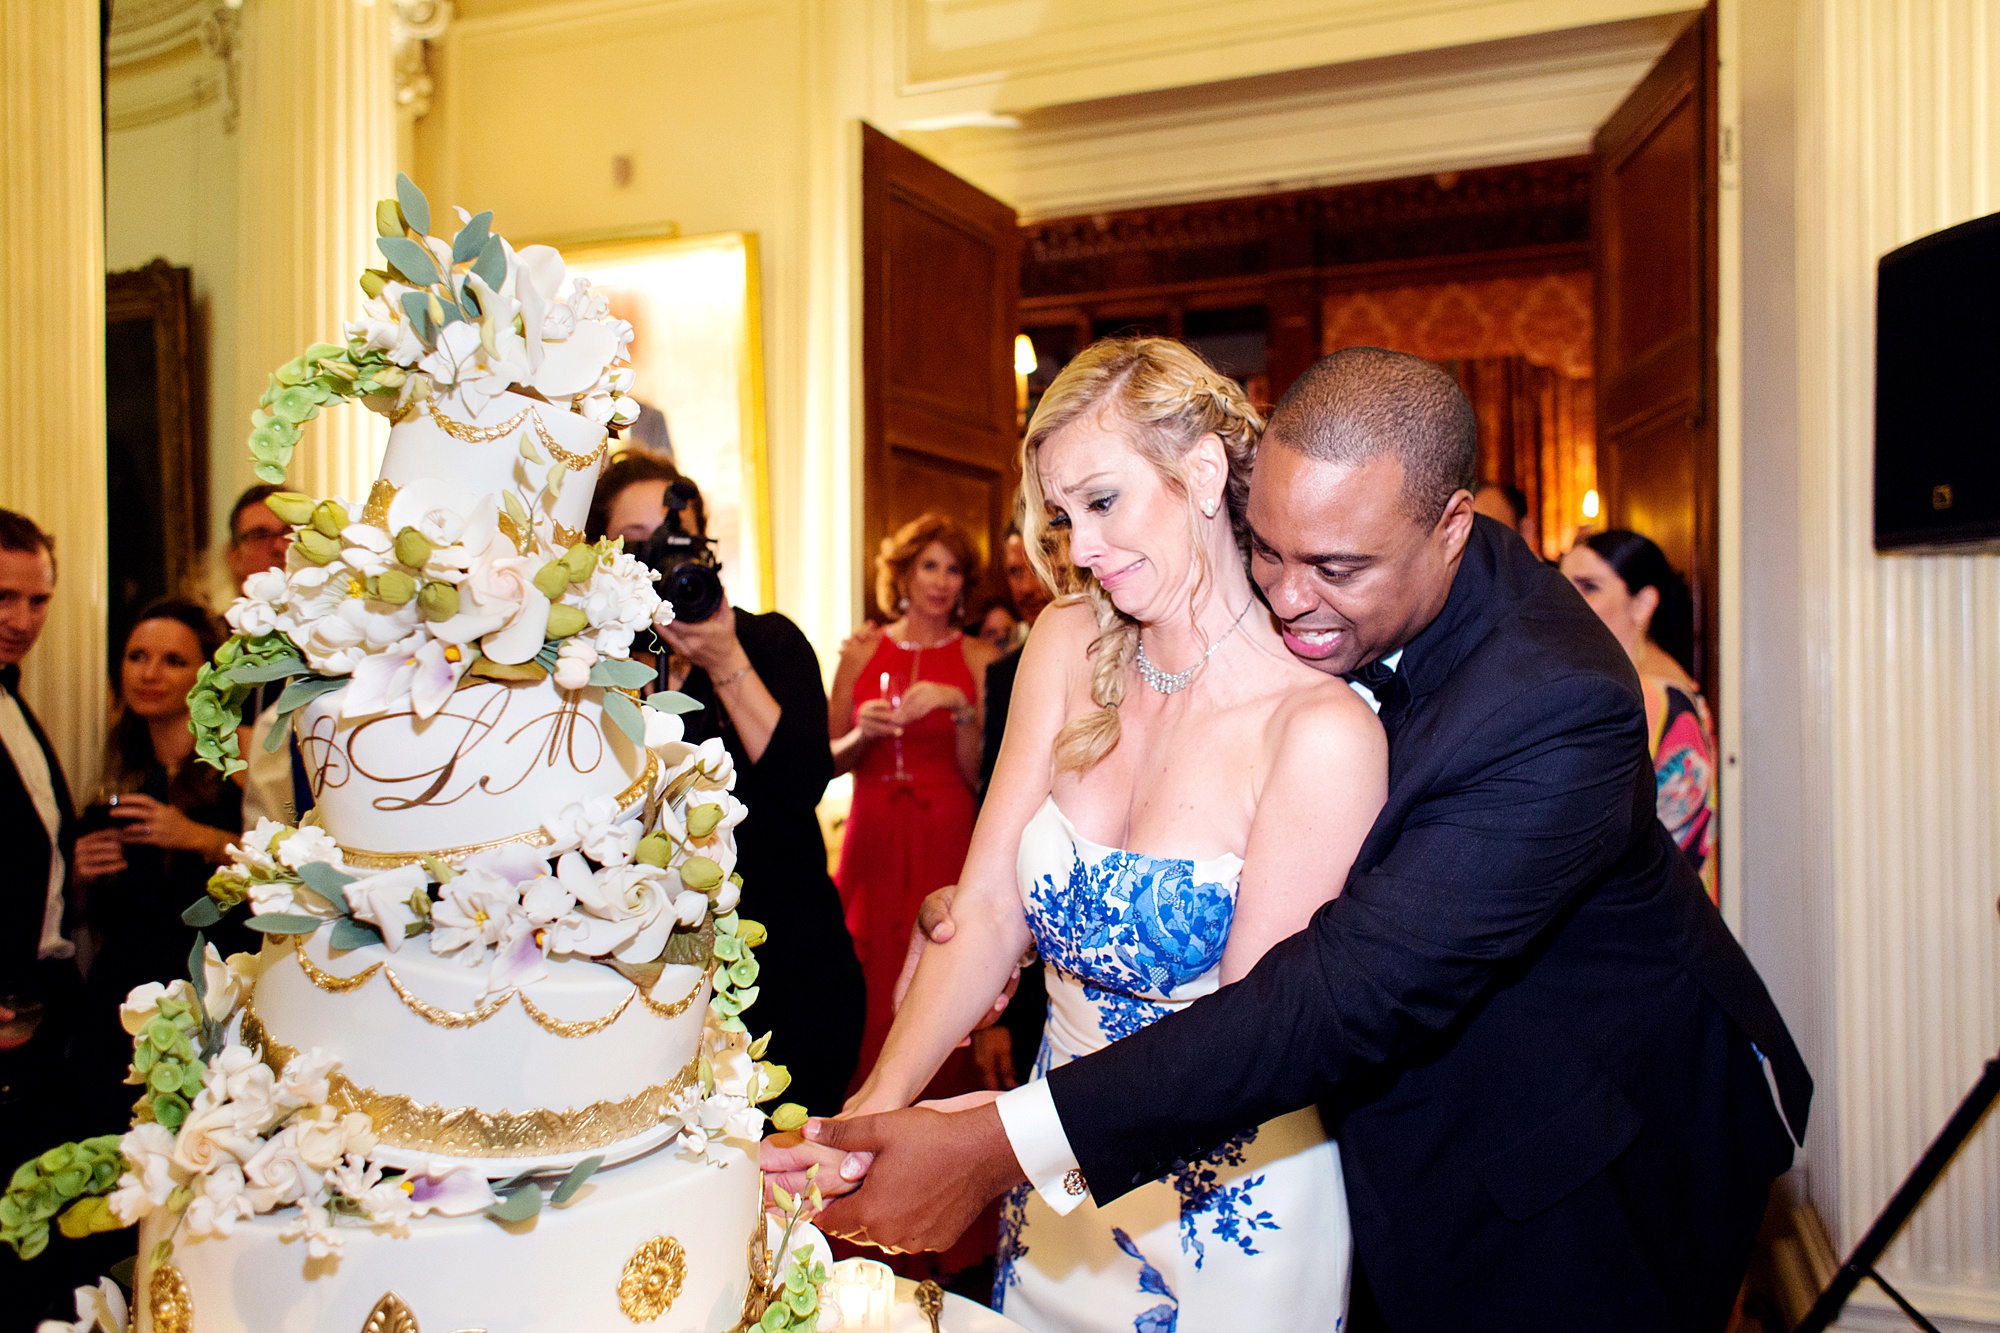 Blond bride wearing a strapless white gown with blue flowers is cutting an enormous elaborately decorated wedding cake, groom stands behind her with his arms around her also helping to cut the cake in a photo by Kyo Morishima